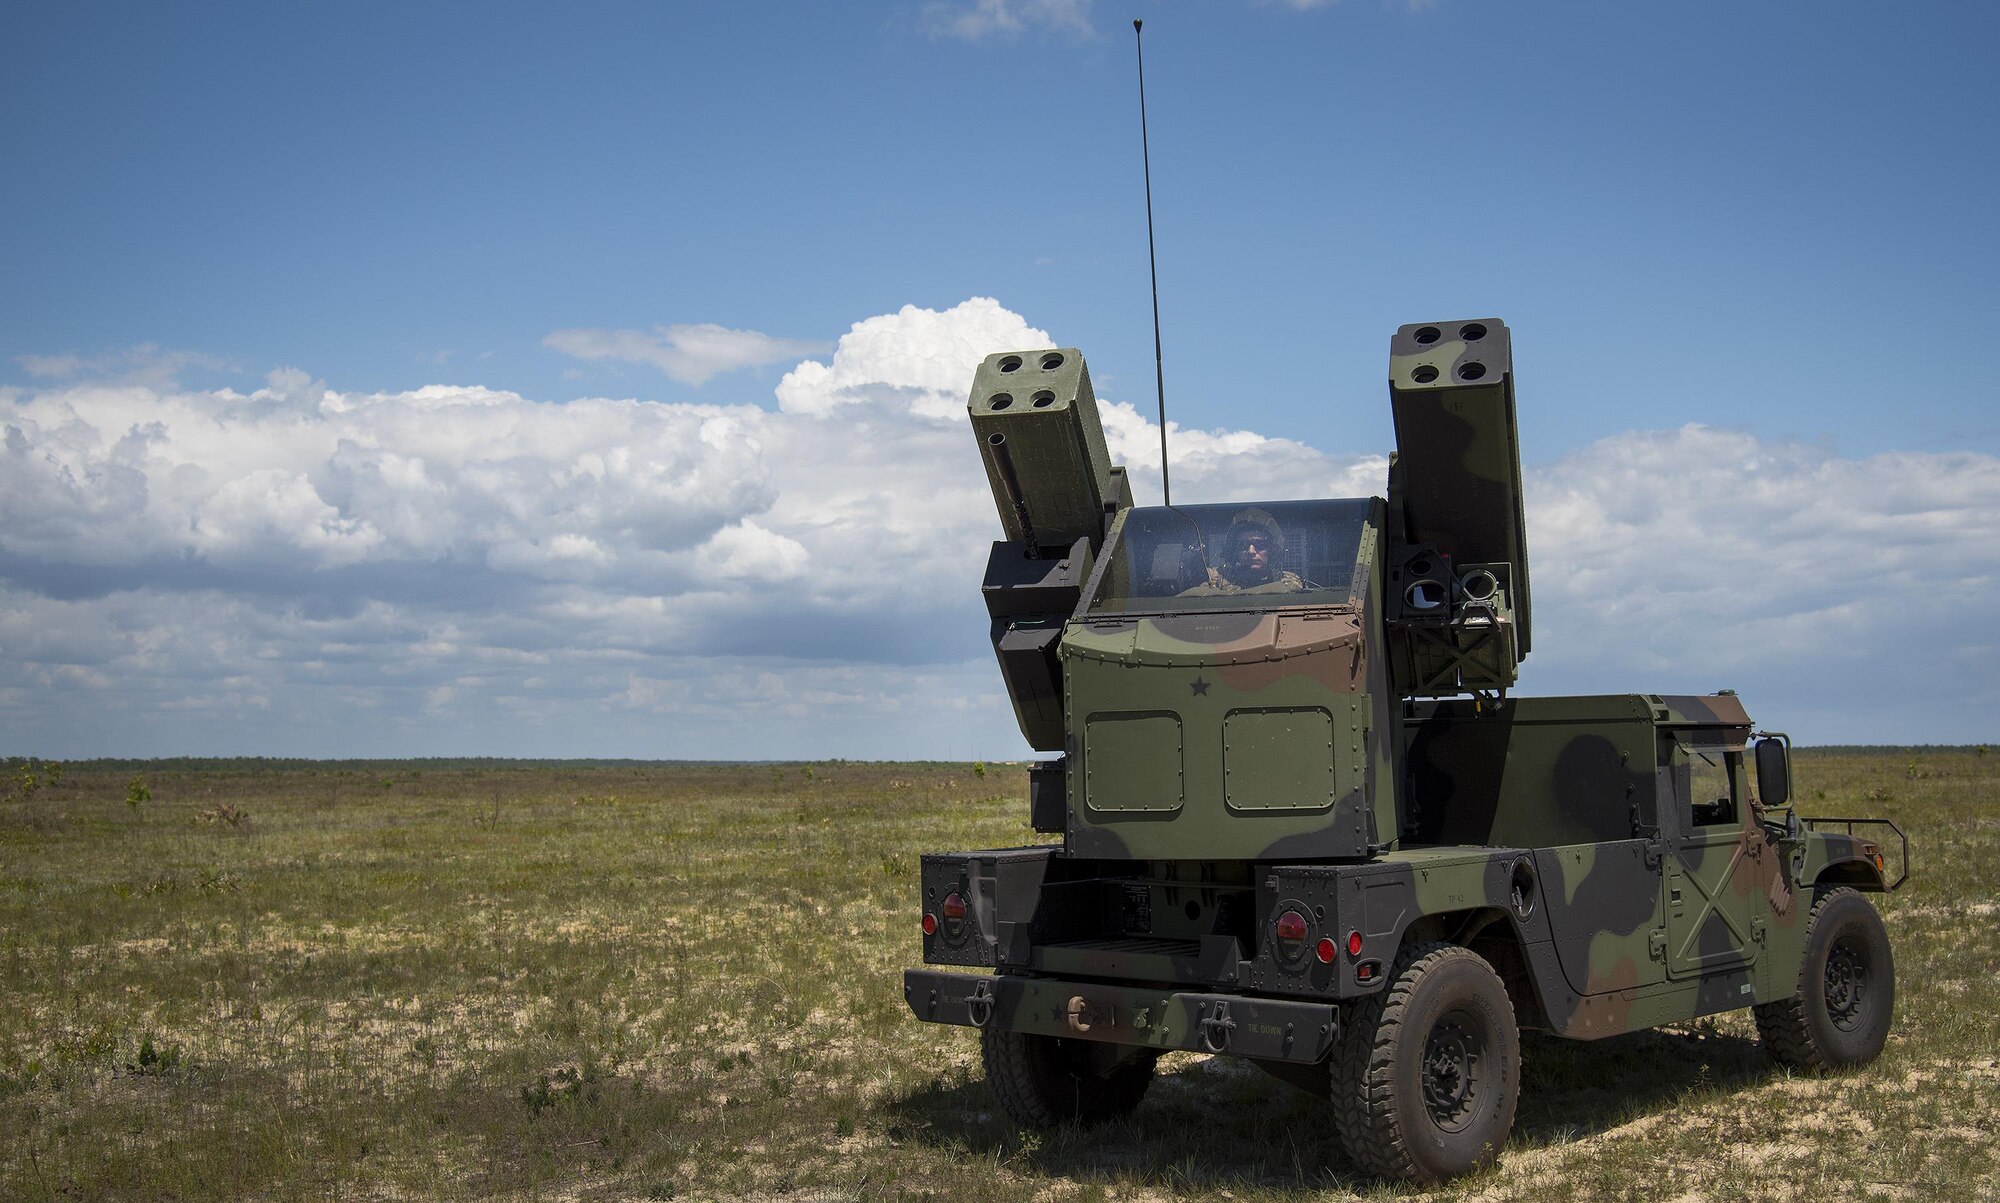 File Photo of Avenger Stinger Launch System on Special Humvee, adapted from defense.gov image